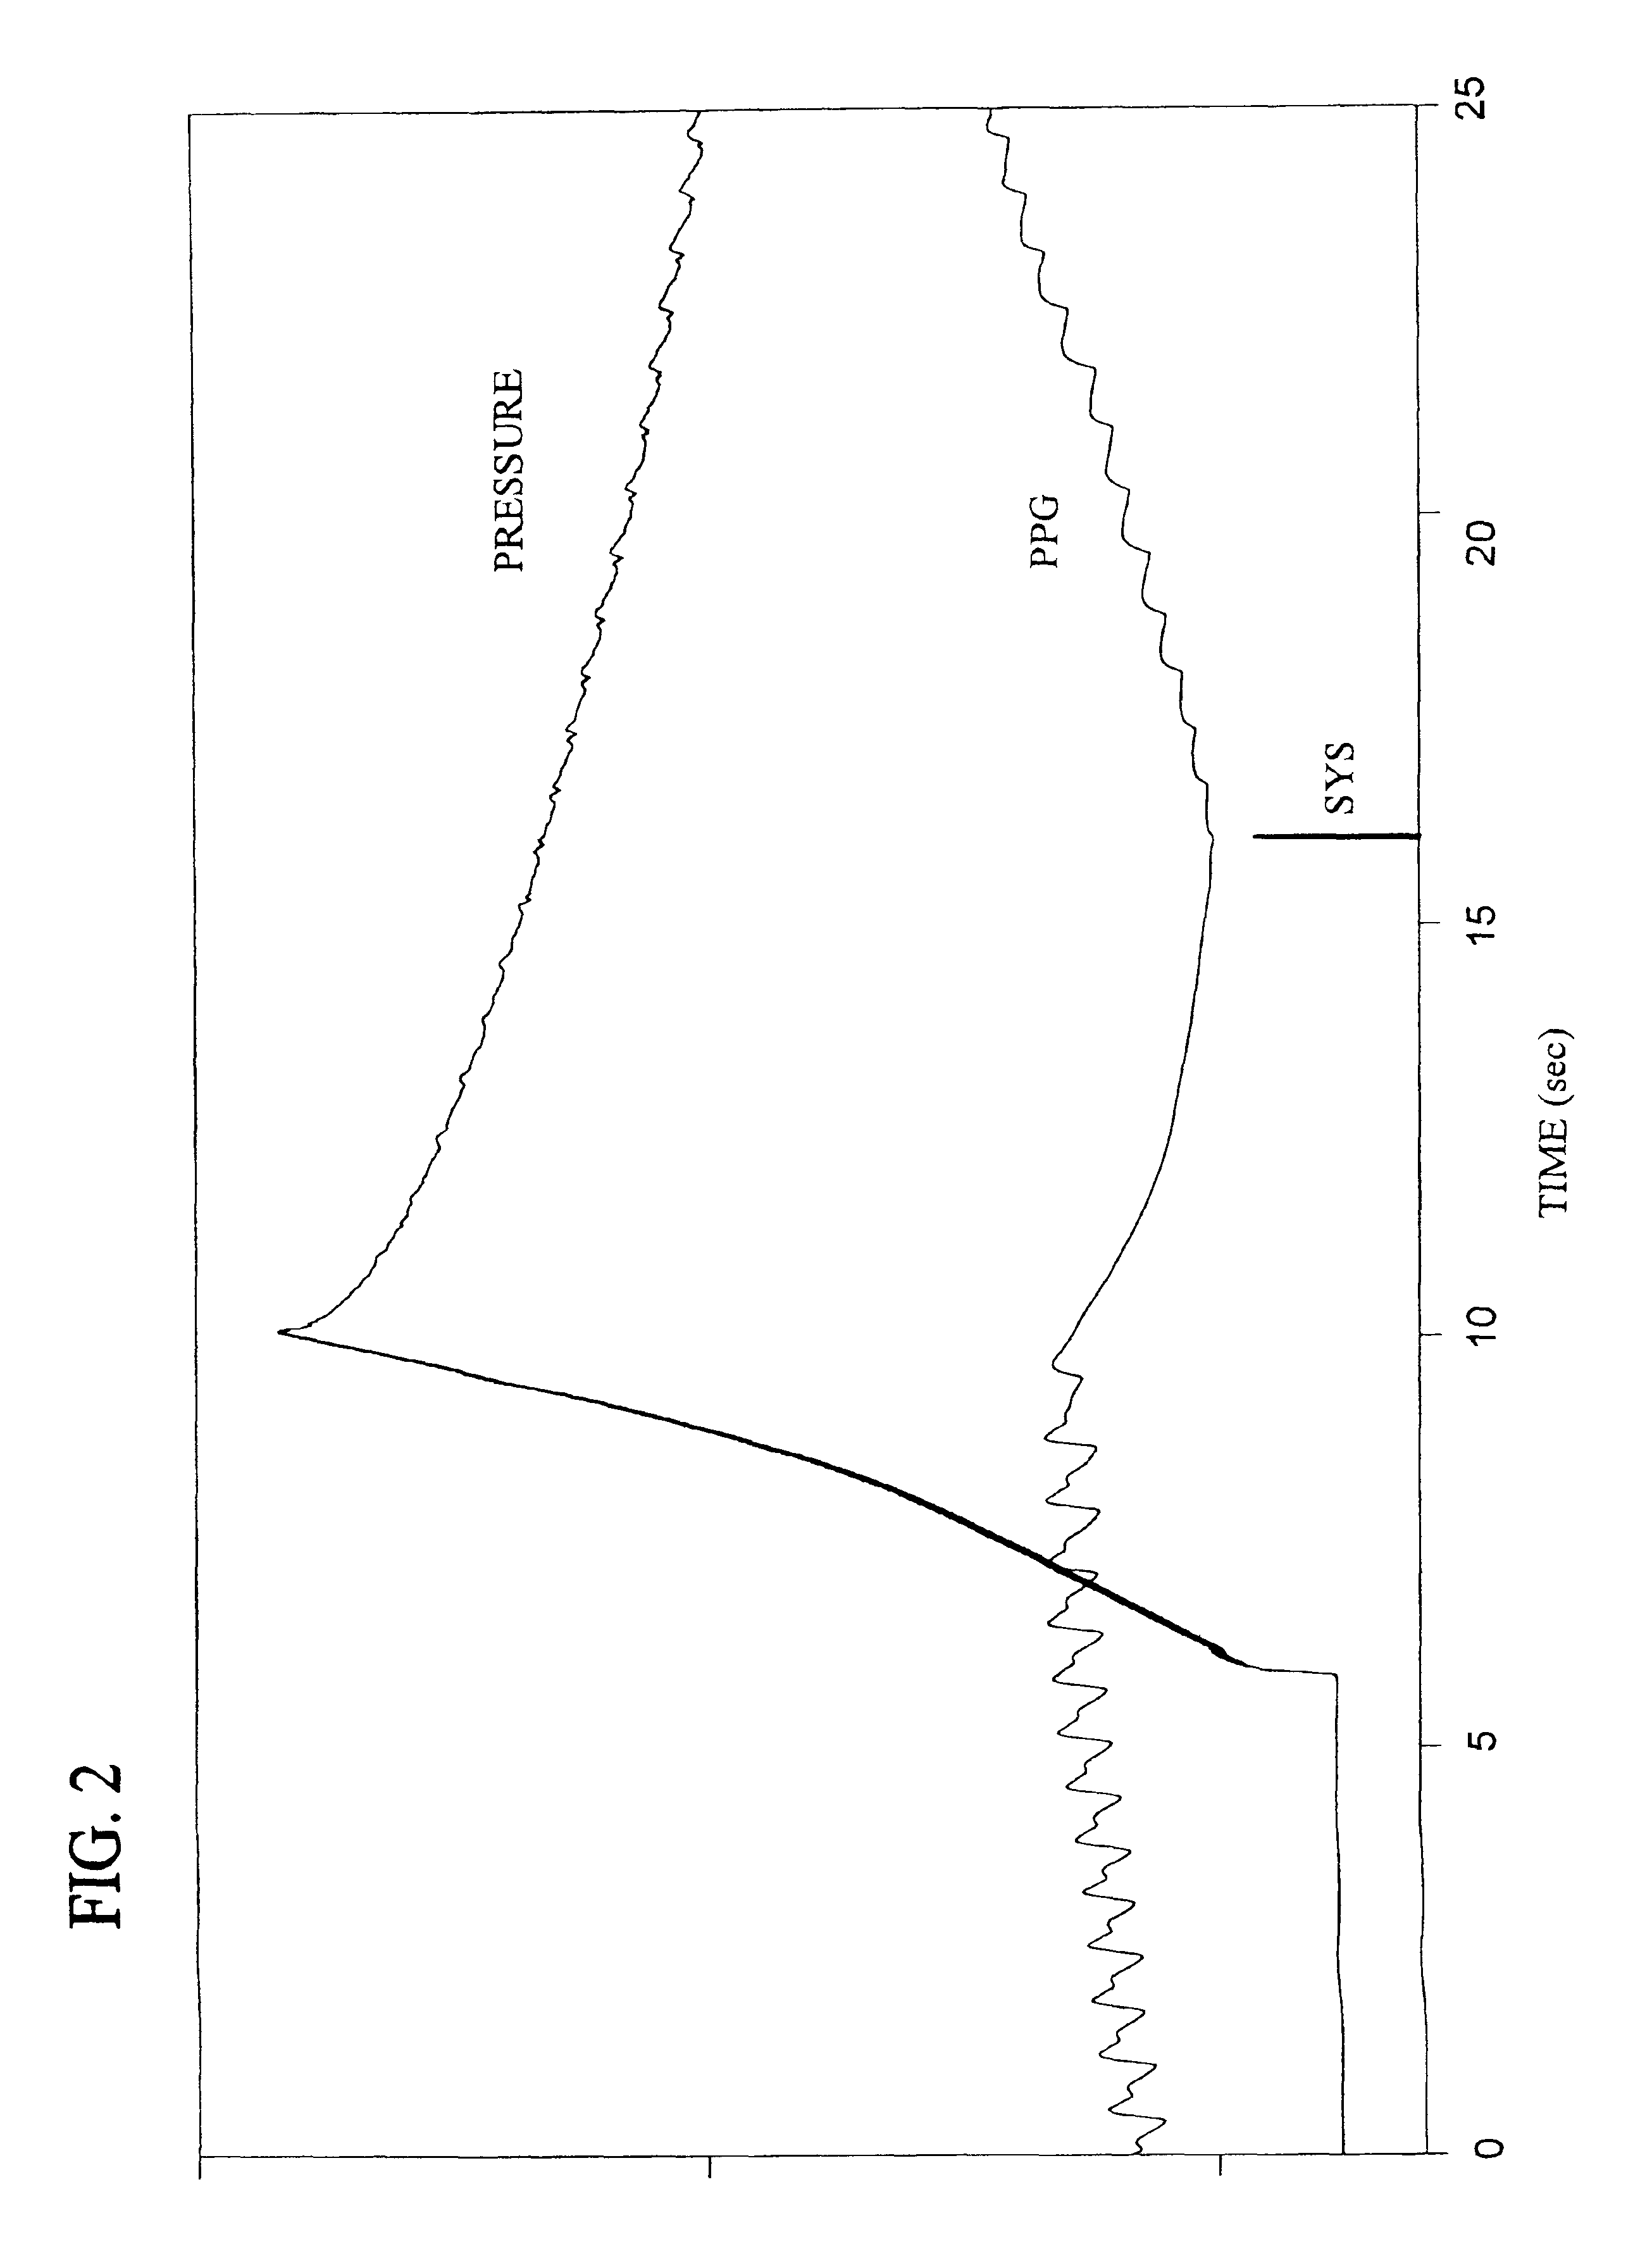 Method for systolic blood pressure measurement